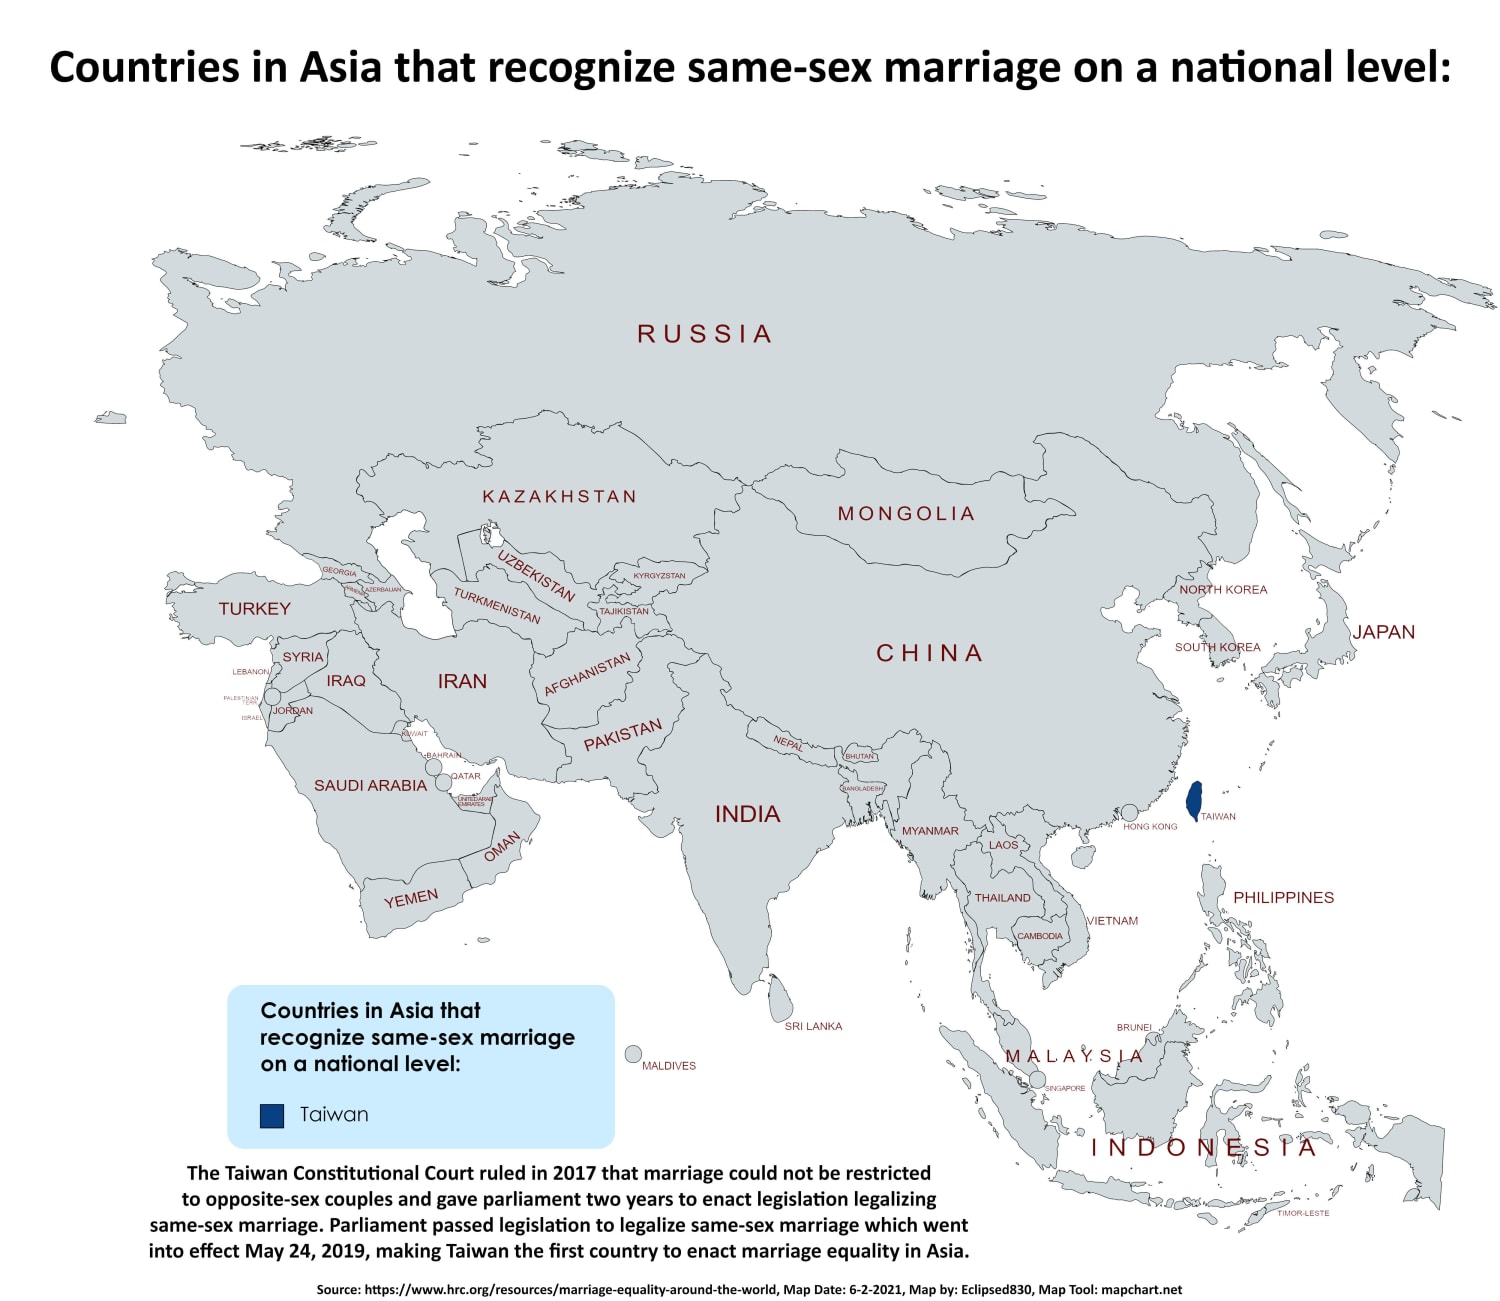 Countries in Asia that recognize marriage equality on a national level